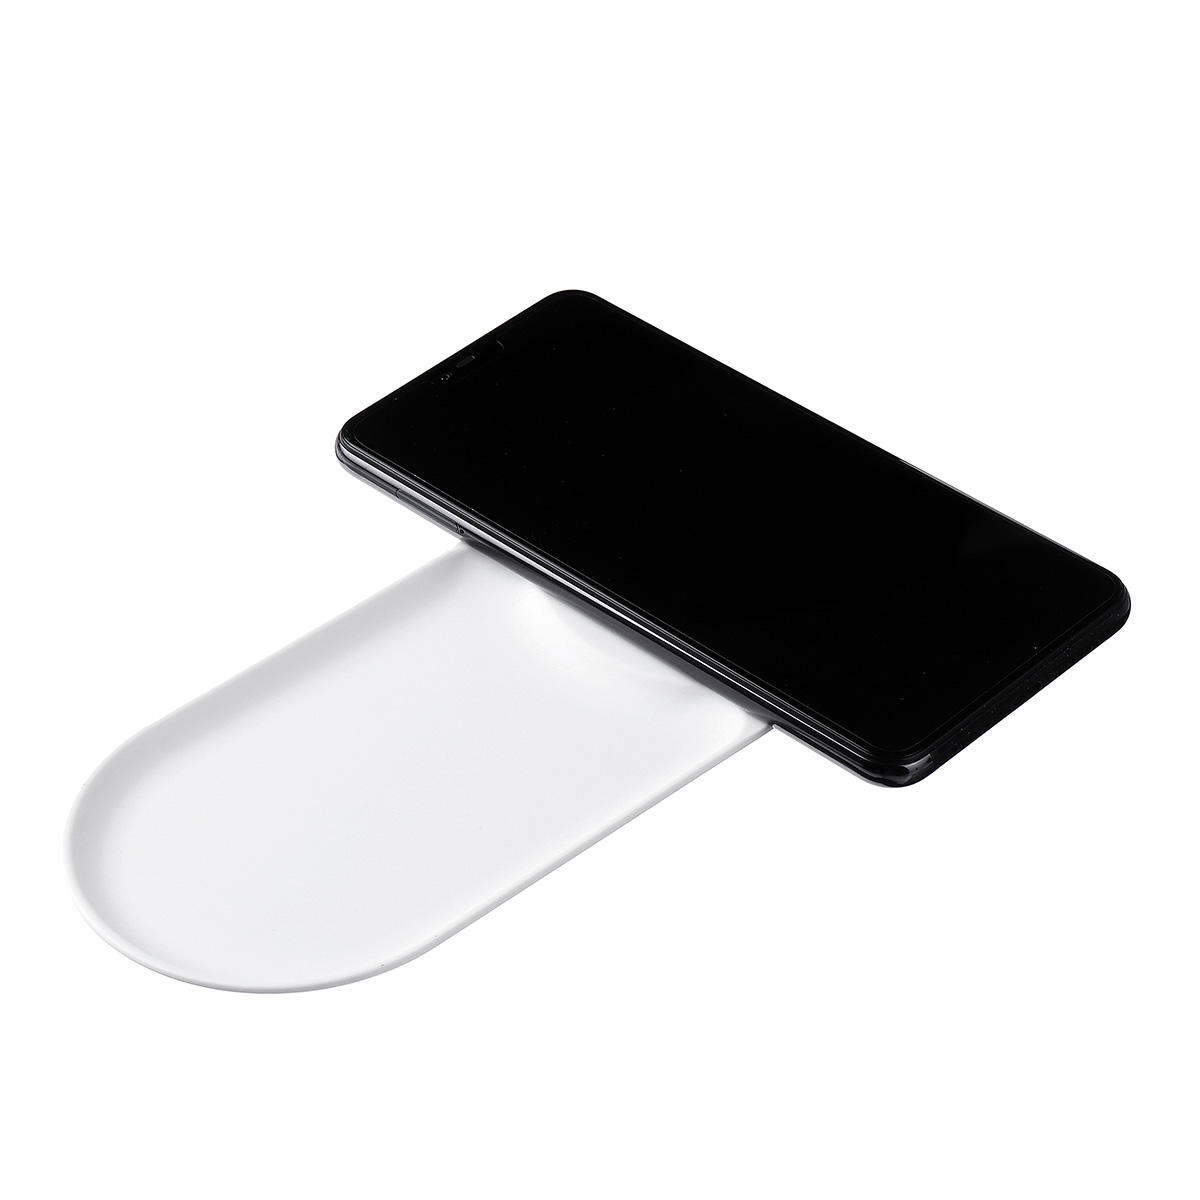 10W Qi Wireless Charger Pad For Qi-enabled Devices iPhone Samsung Huawei LG